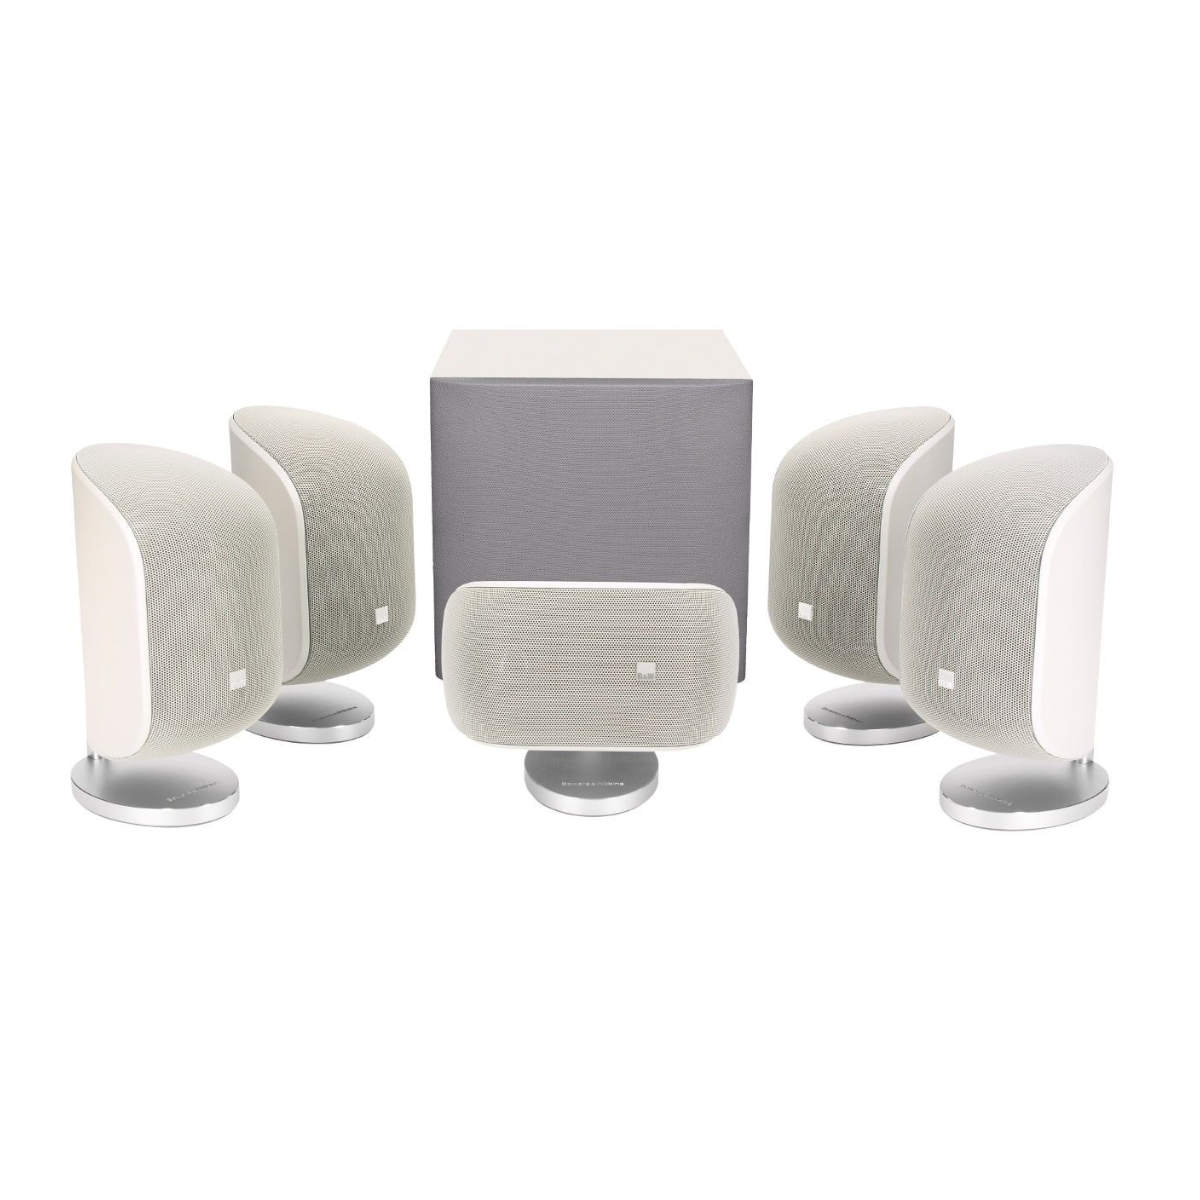 Bowers & Wilkins (B&W) MT-50D 5.1 Channel Speaker Package with ASW608 compact subwoofer (white) - Ooberpad